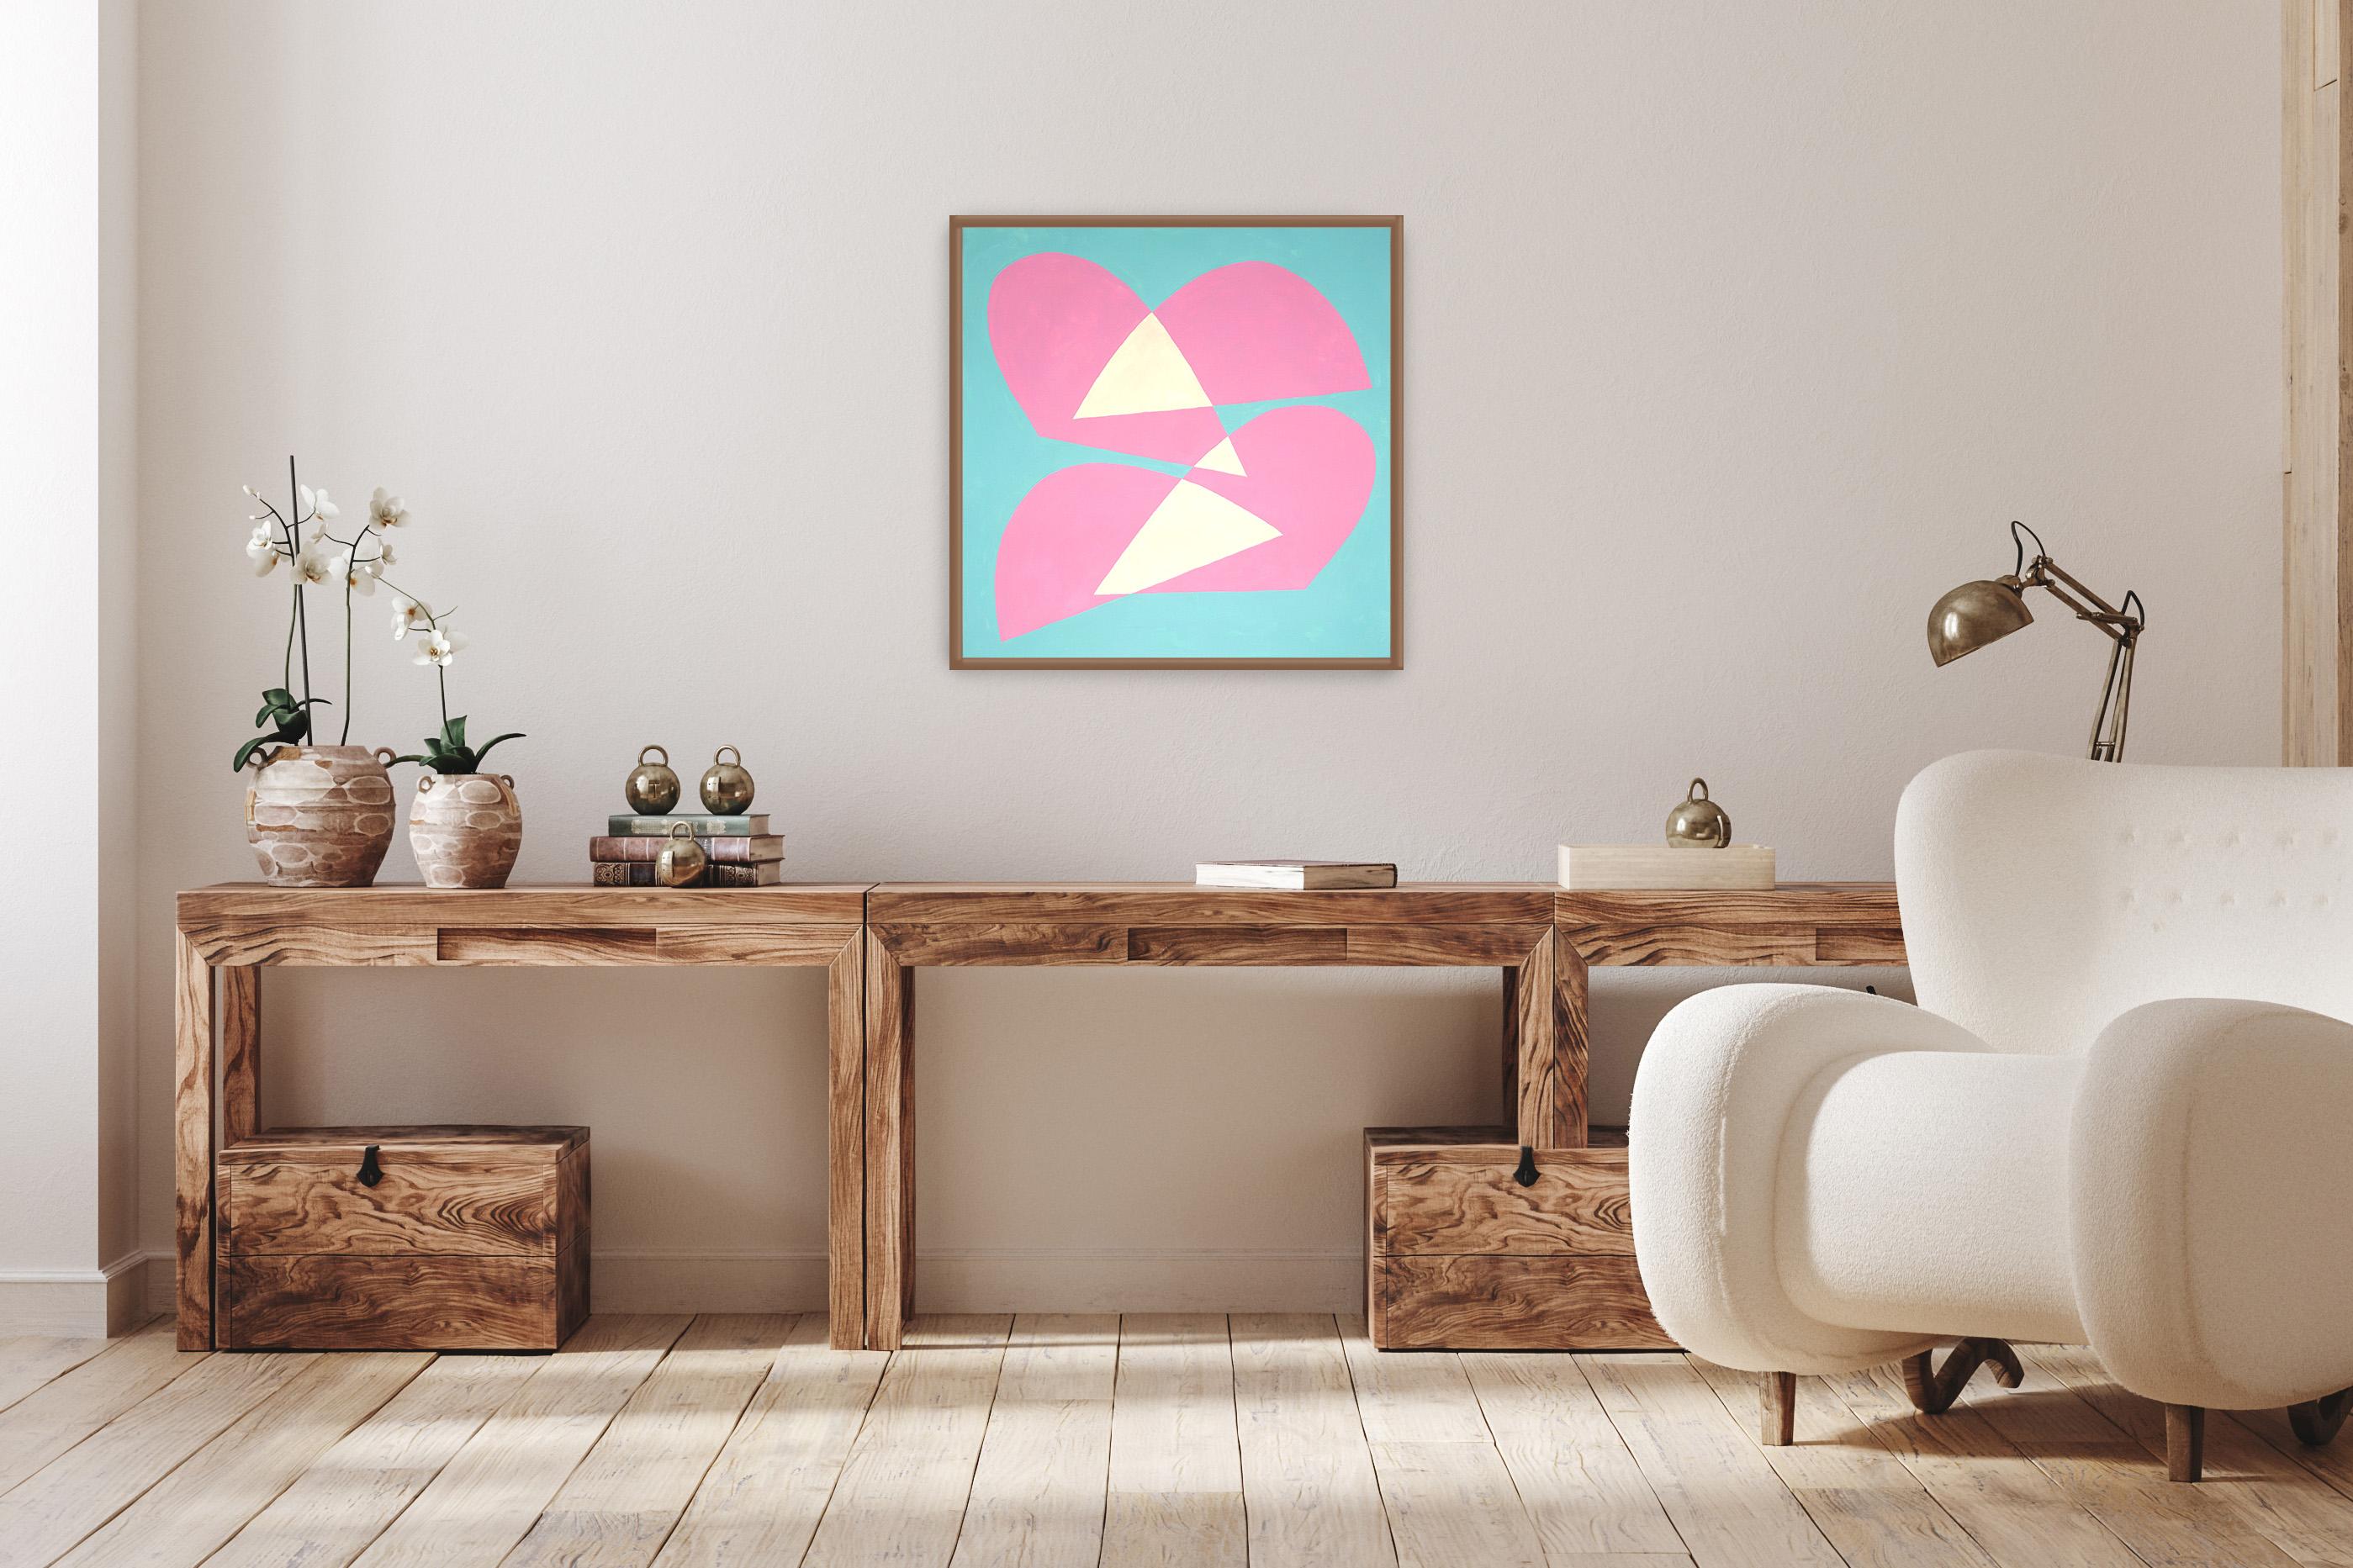 Crossing Arcs, Cutout Pastel Tones Shapes, Pale Pink, Turquoise, Modern, Neutral - Abstract Painting by Ryan Rivadeneyra